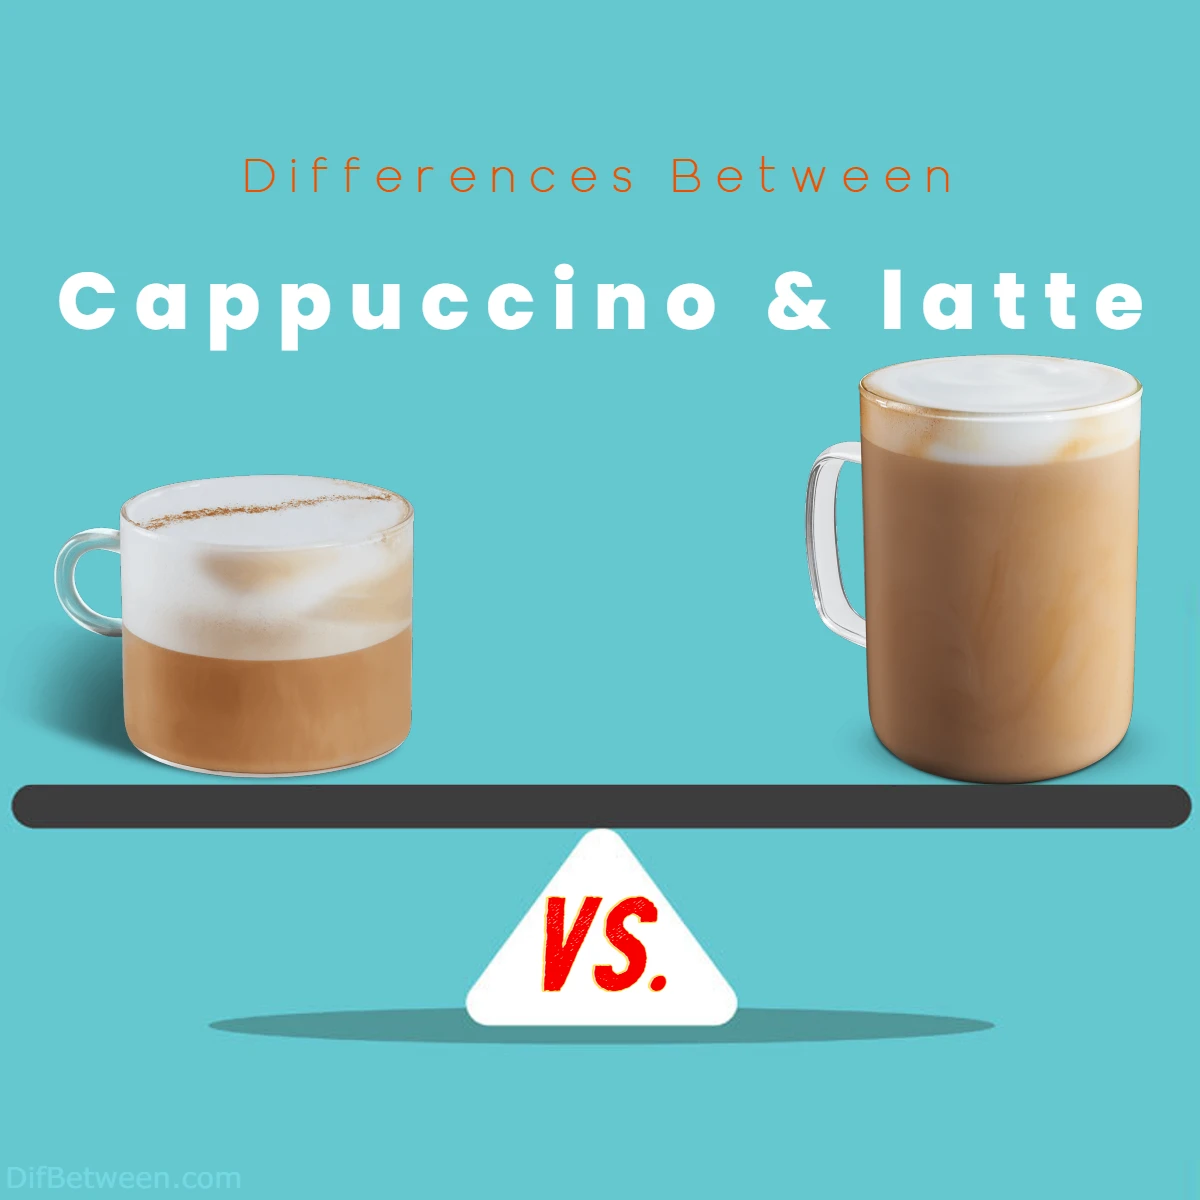 Differences Between Lattes and Cappuccinos